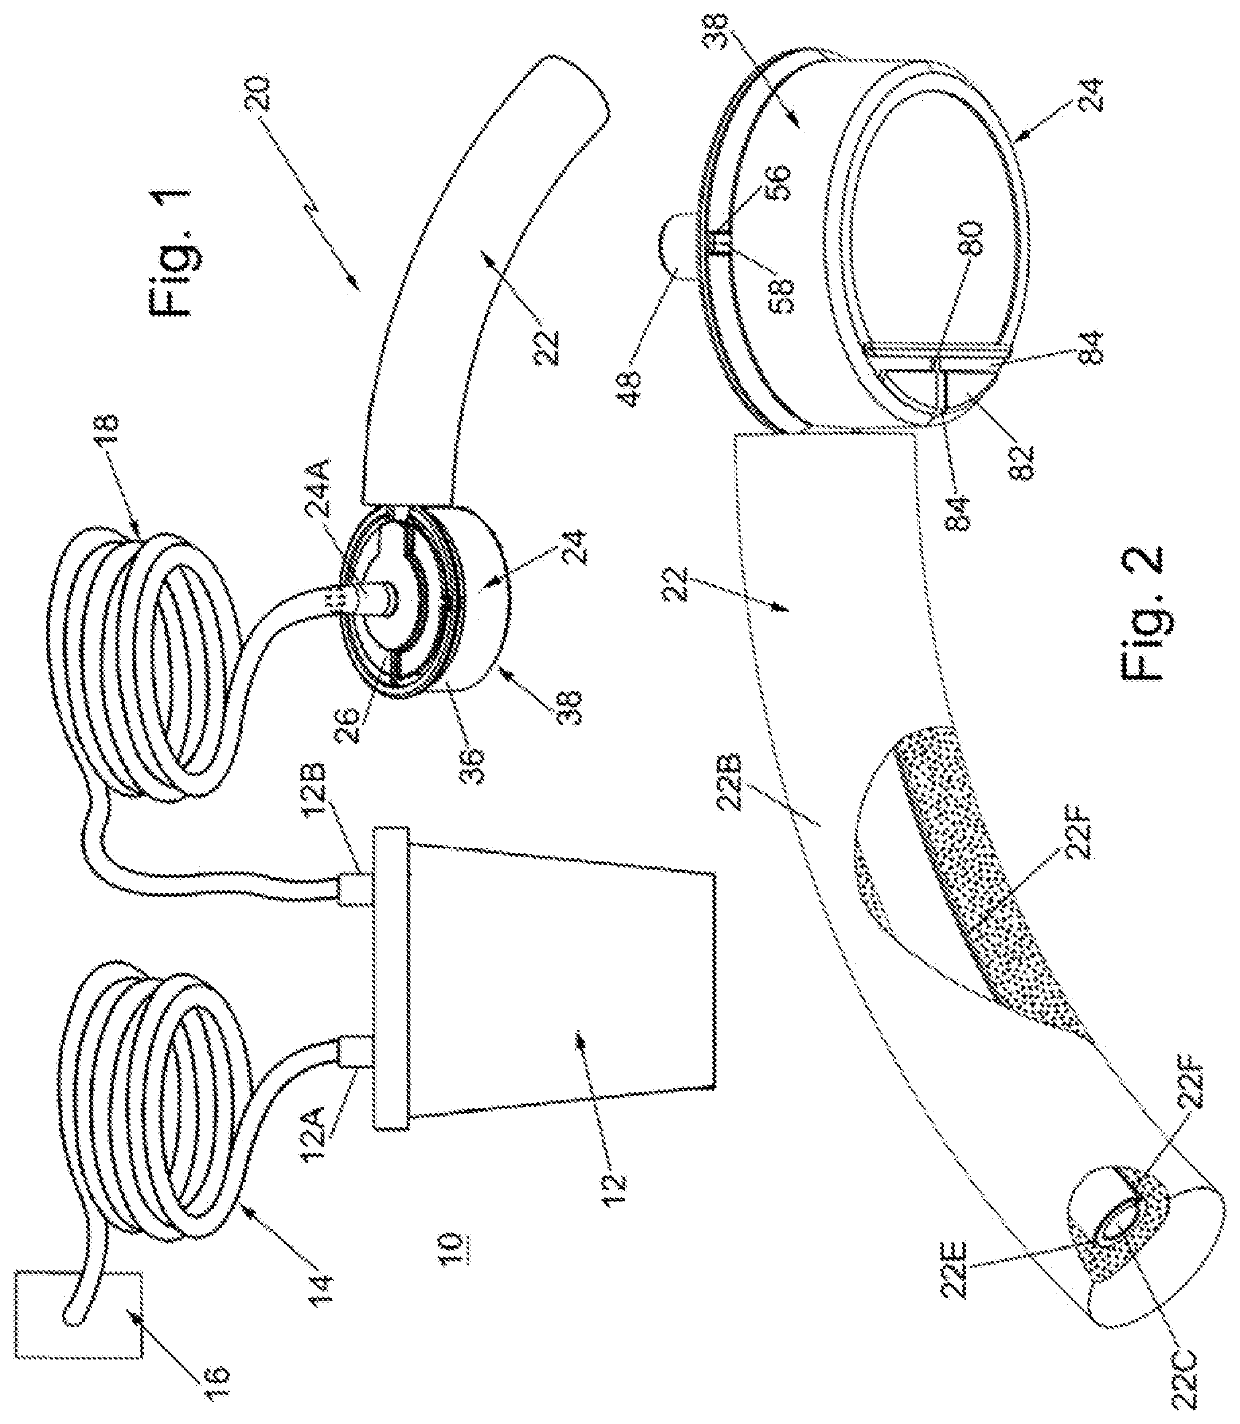 Method of use of external female catheter system with integrated suction regulator